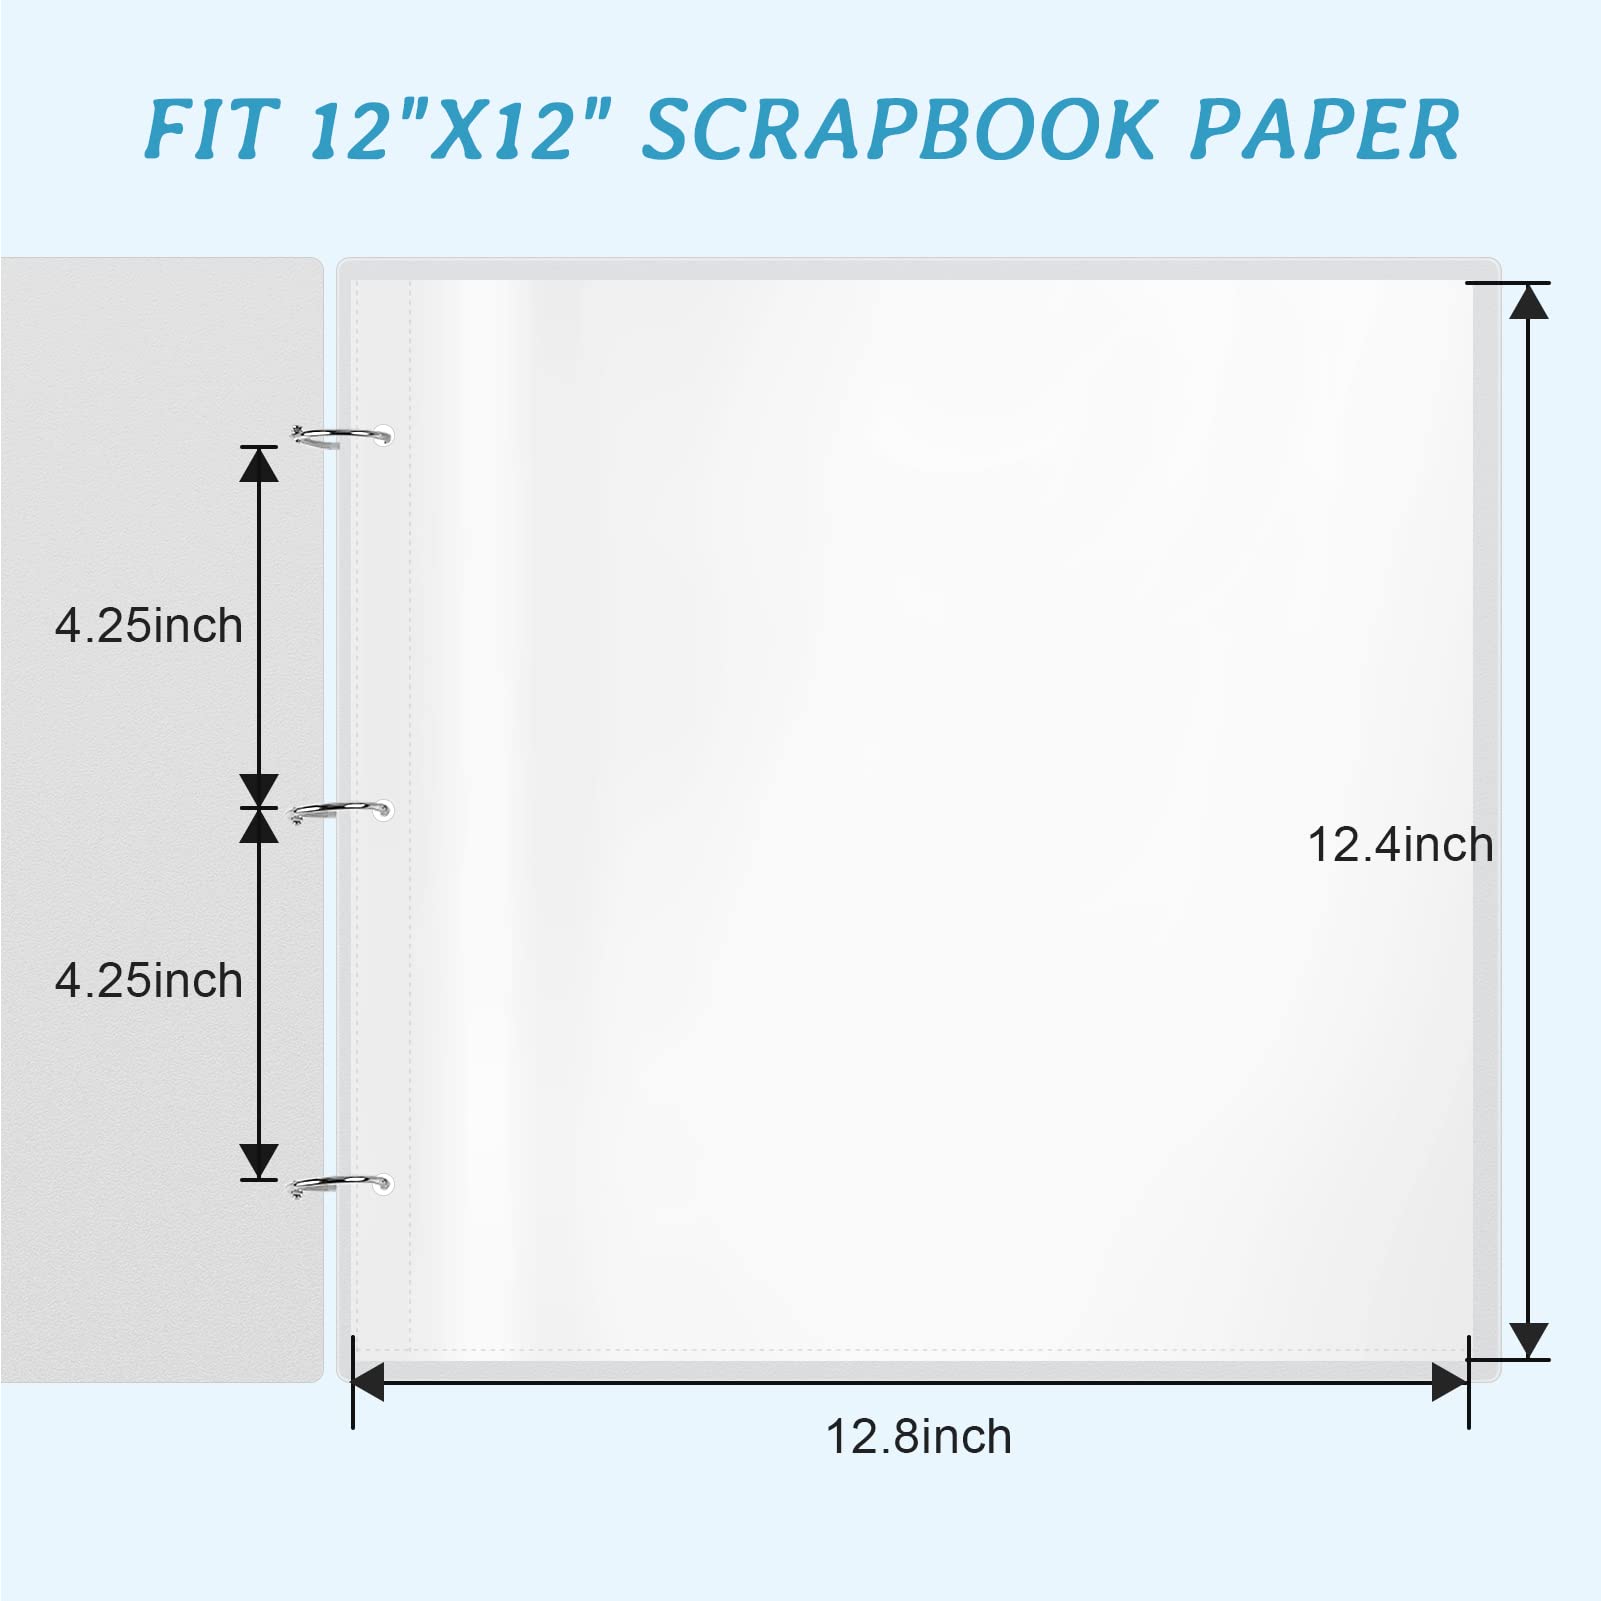  Caydo 100 Pack 12x12 Inch Scrapbook Refill Pages with 9 Pieces  Binder Rings, Fits 3 Ring Scrapbooking Binders and Standard Scrapbook Paper  Albums, Acid Free, PVC Free Scrapbook Page Protectors